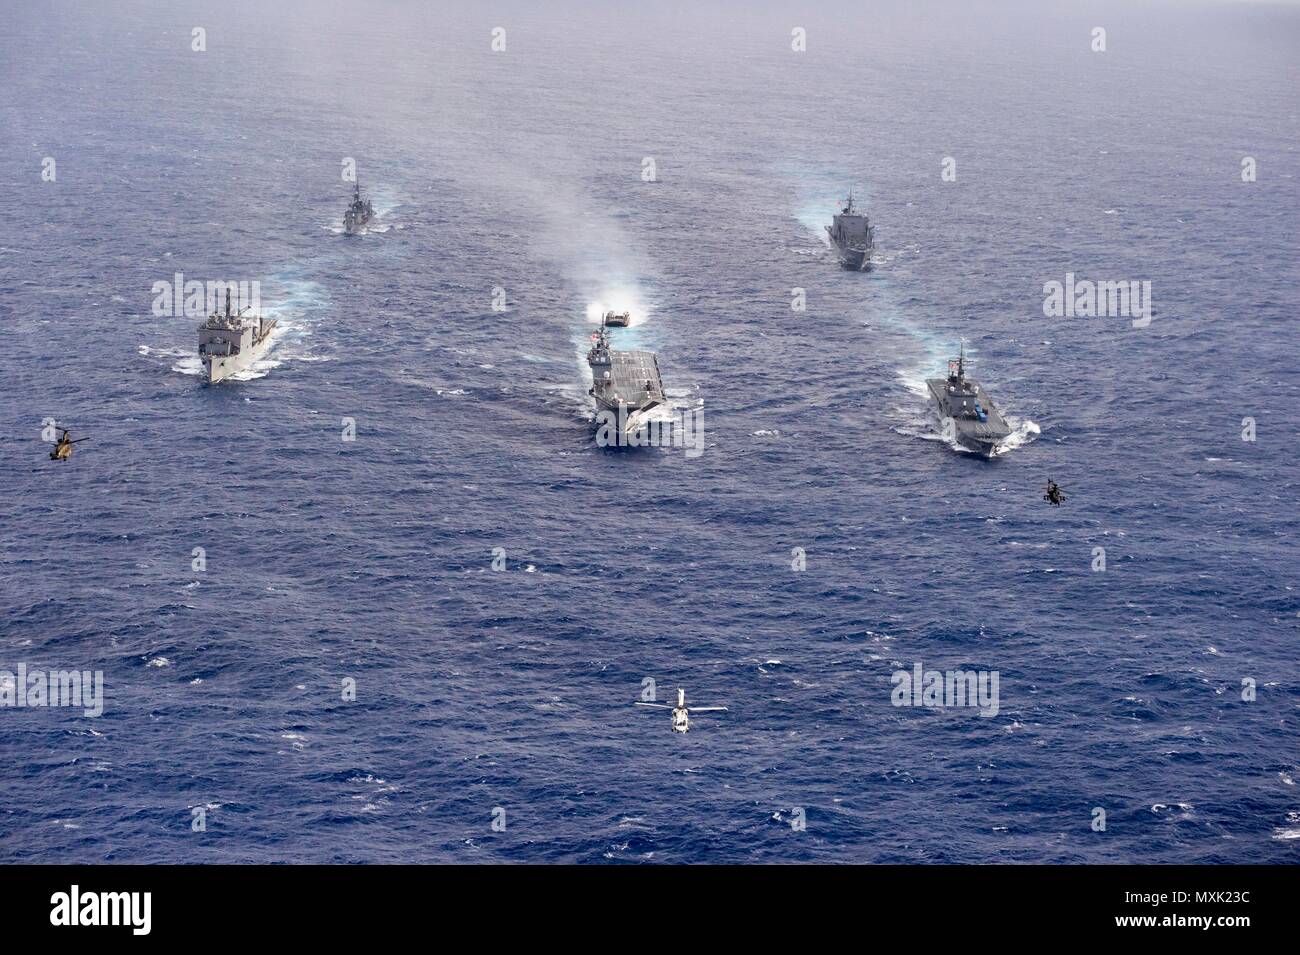 161106-N-ZK021-403 PACIFIC OCEAN (Nov. 6, 2016) - Ships participating in Keen Sword 2017 steam in formation during a photo exercise. Keen Sword 17 is a joint and bilateral field training exercise (FTX) between U.S. and Japanese forces meant to increase readiness and interoperability within the framework of the U.S. – Japan alliance. (U.S. Navy photo by Petty Officer First Class Nardel Gervacio/Released) Stock Photo